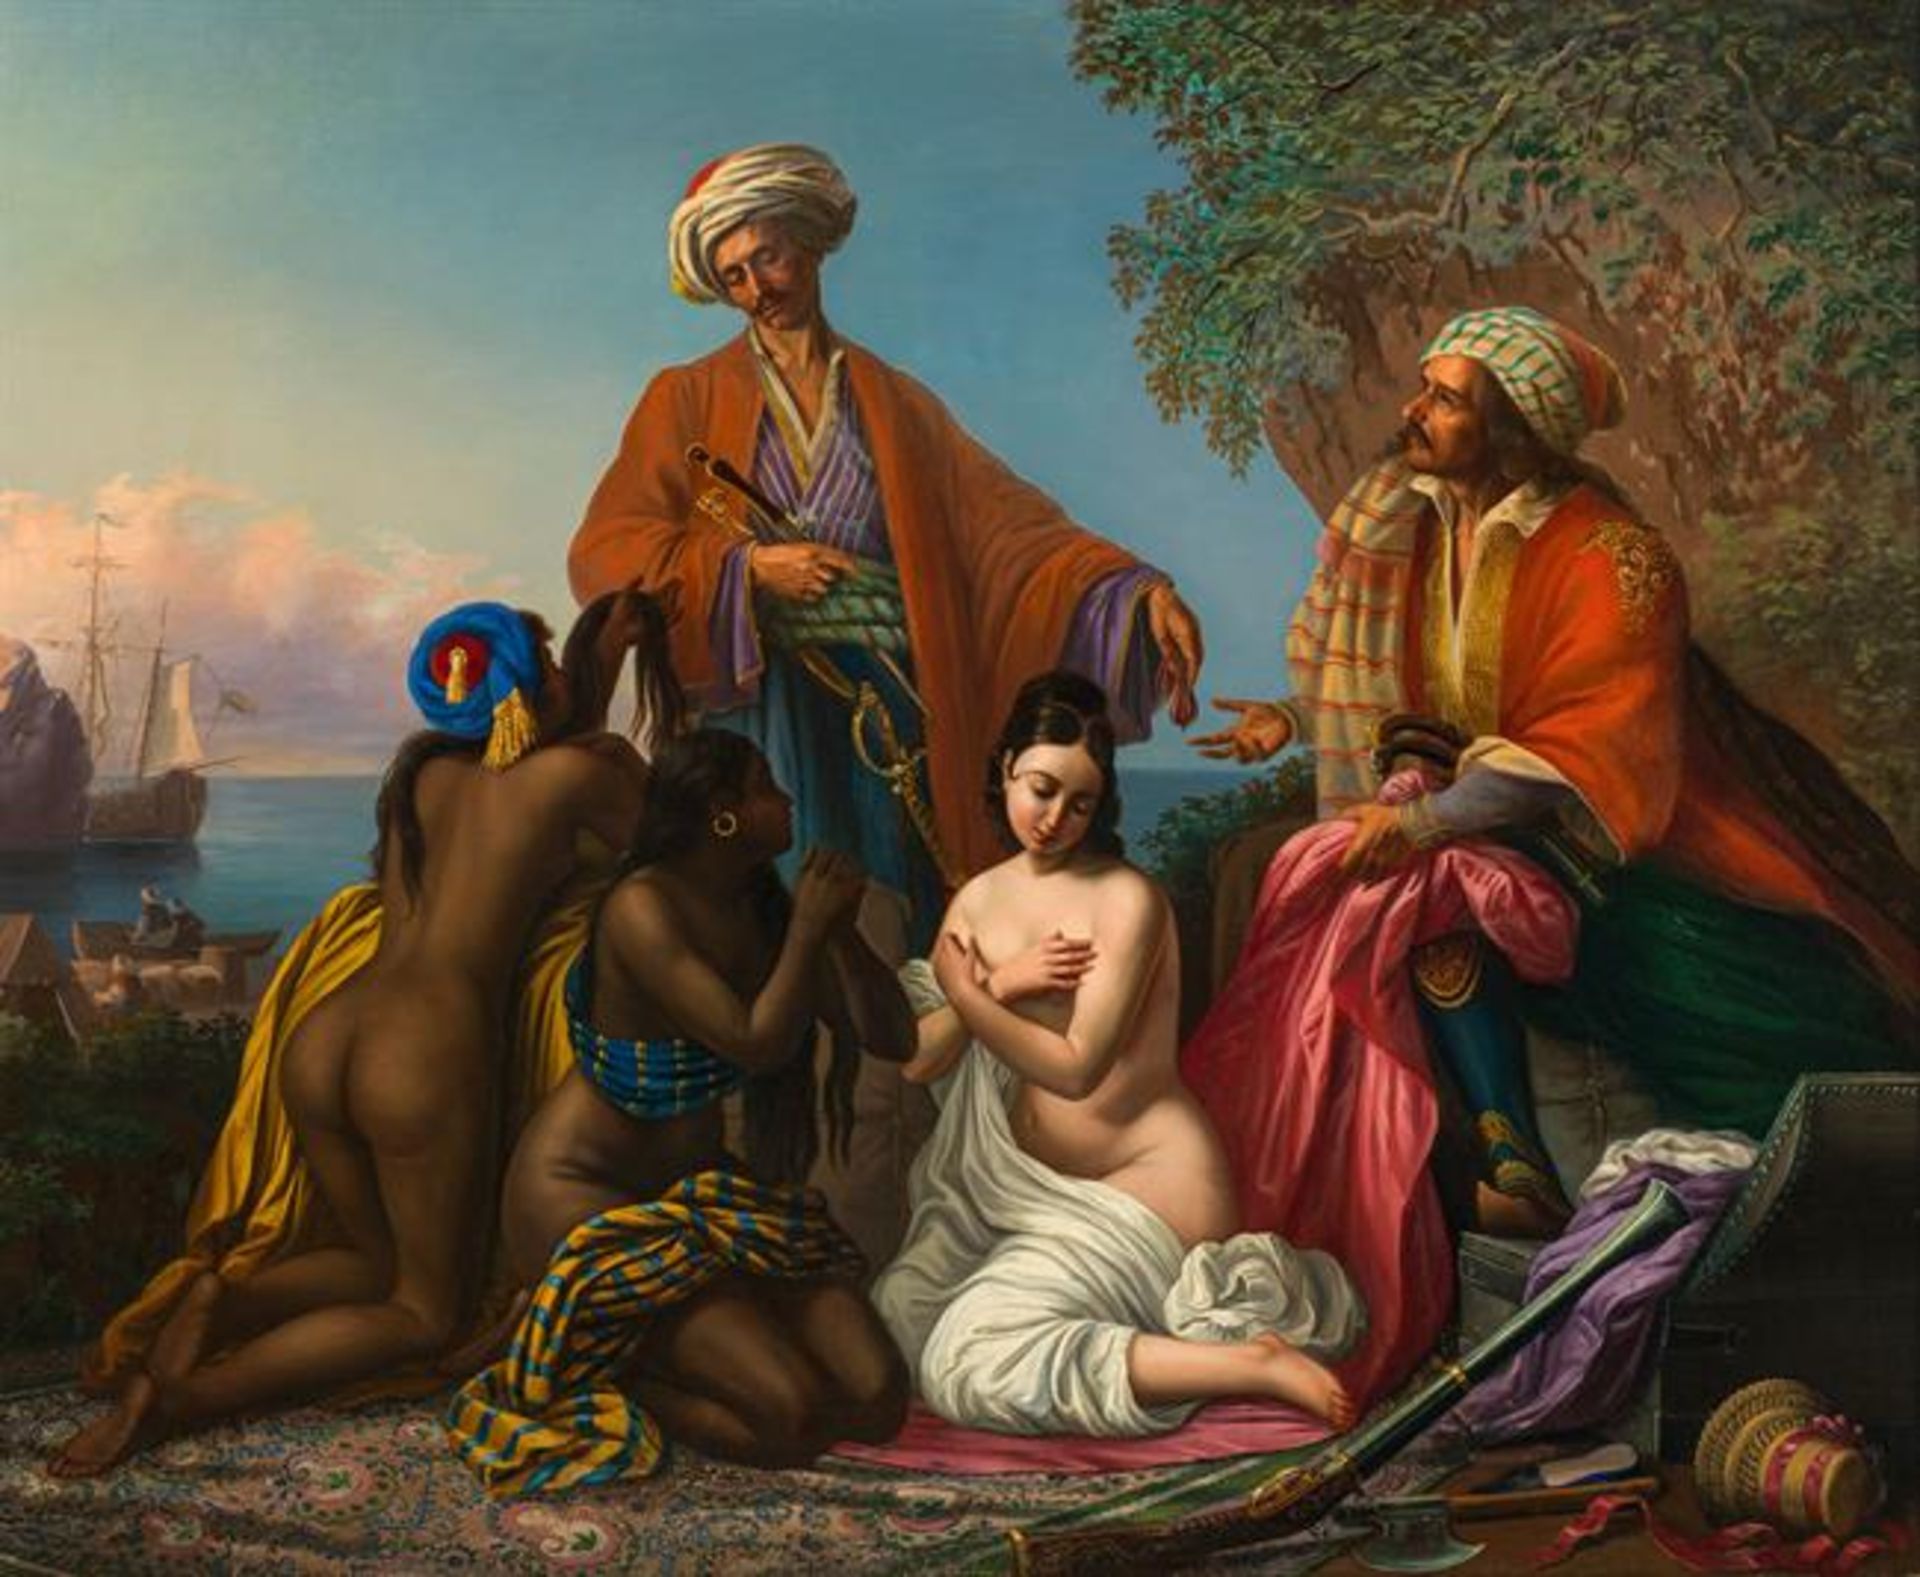 Artist of the 19th century: Oriental slave traders